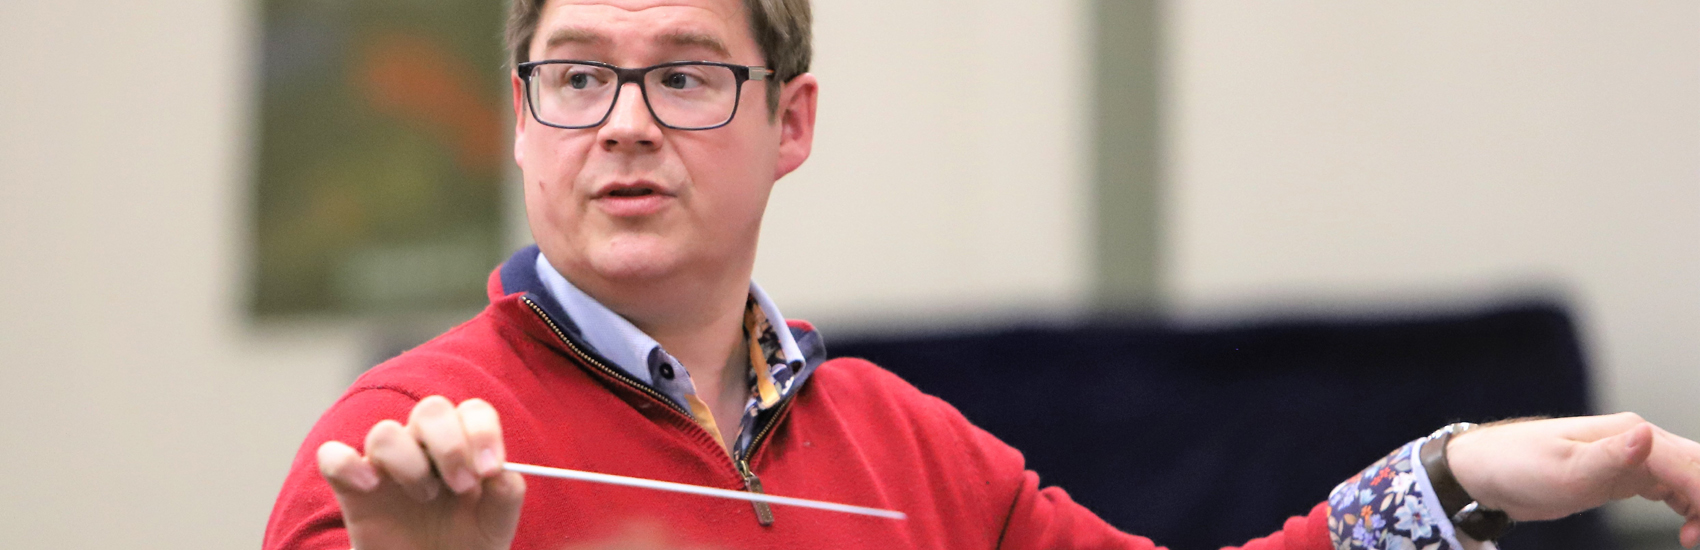 David Pearce - Conductor of Louth Wind Orchestra